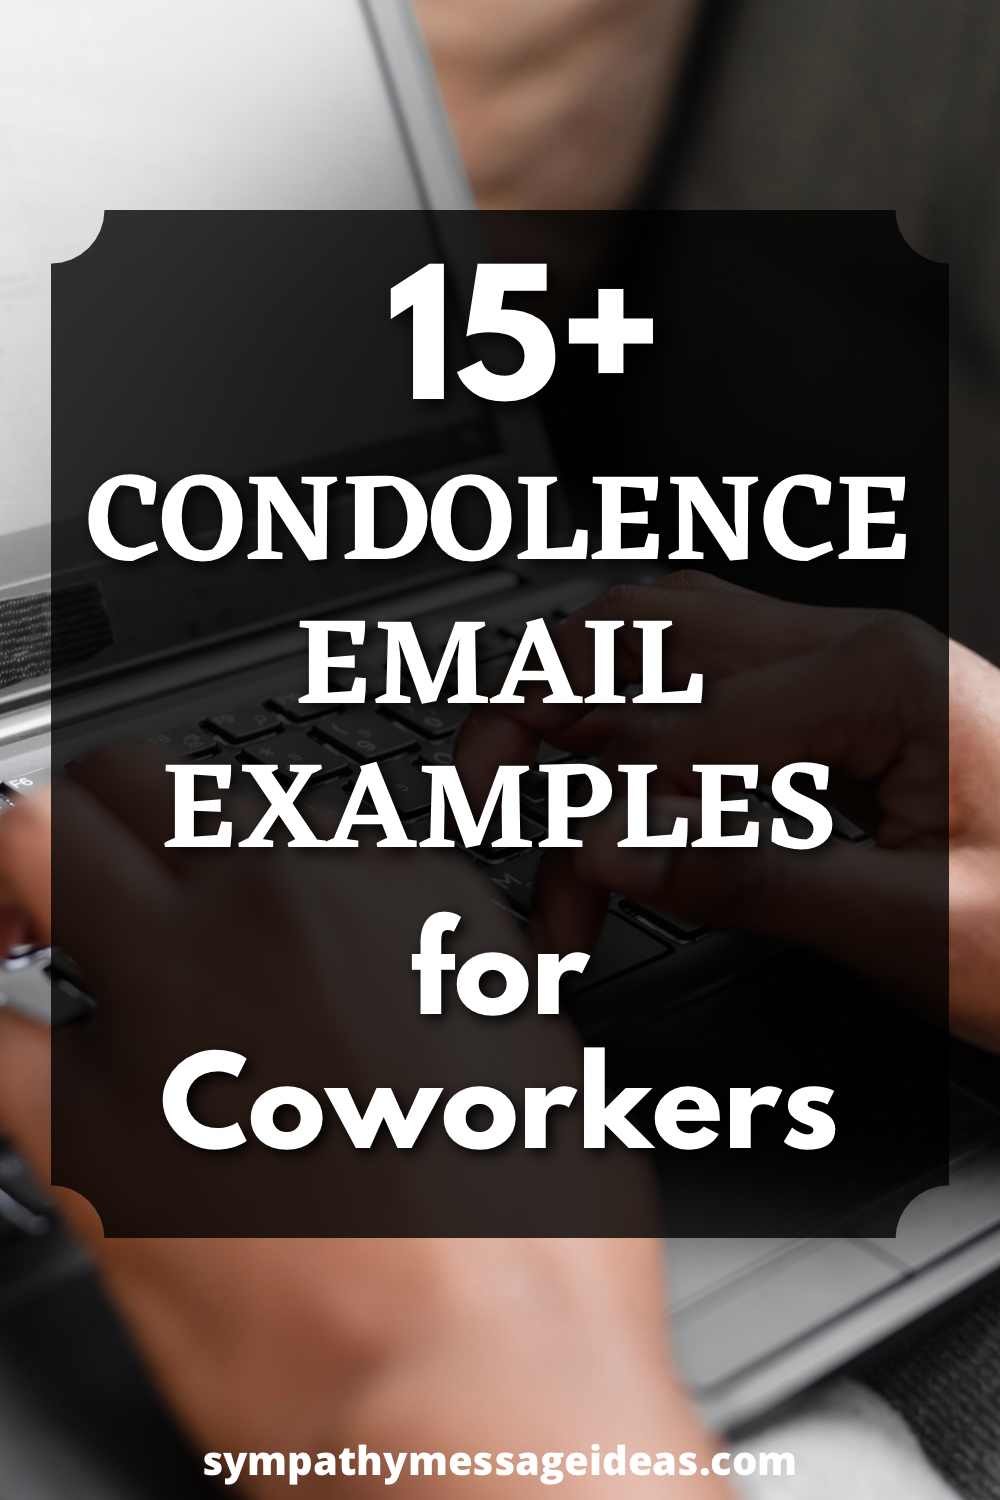 condolence email examples for coworkers